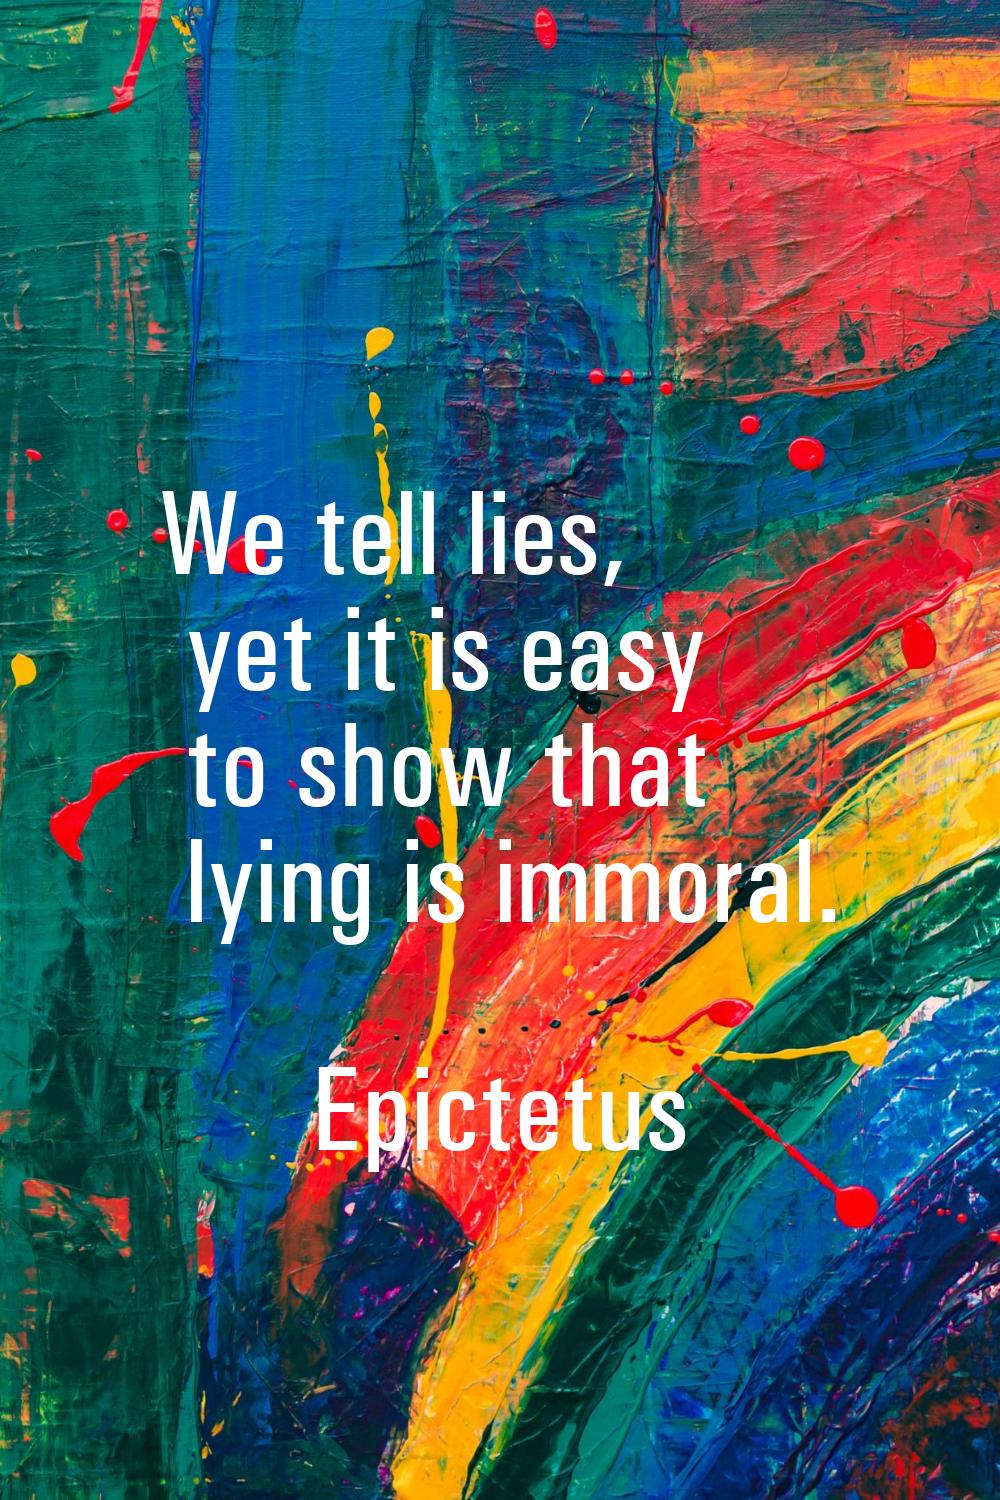 We tell lies, yet it is easy to show that lying is immoral.